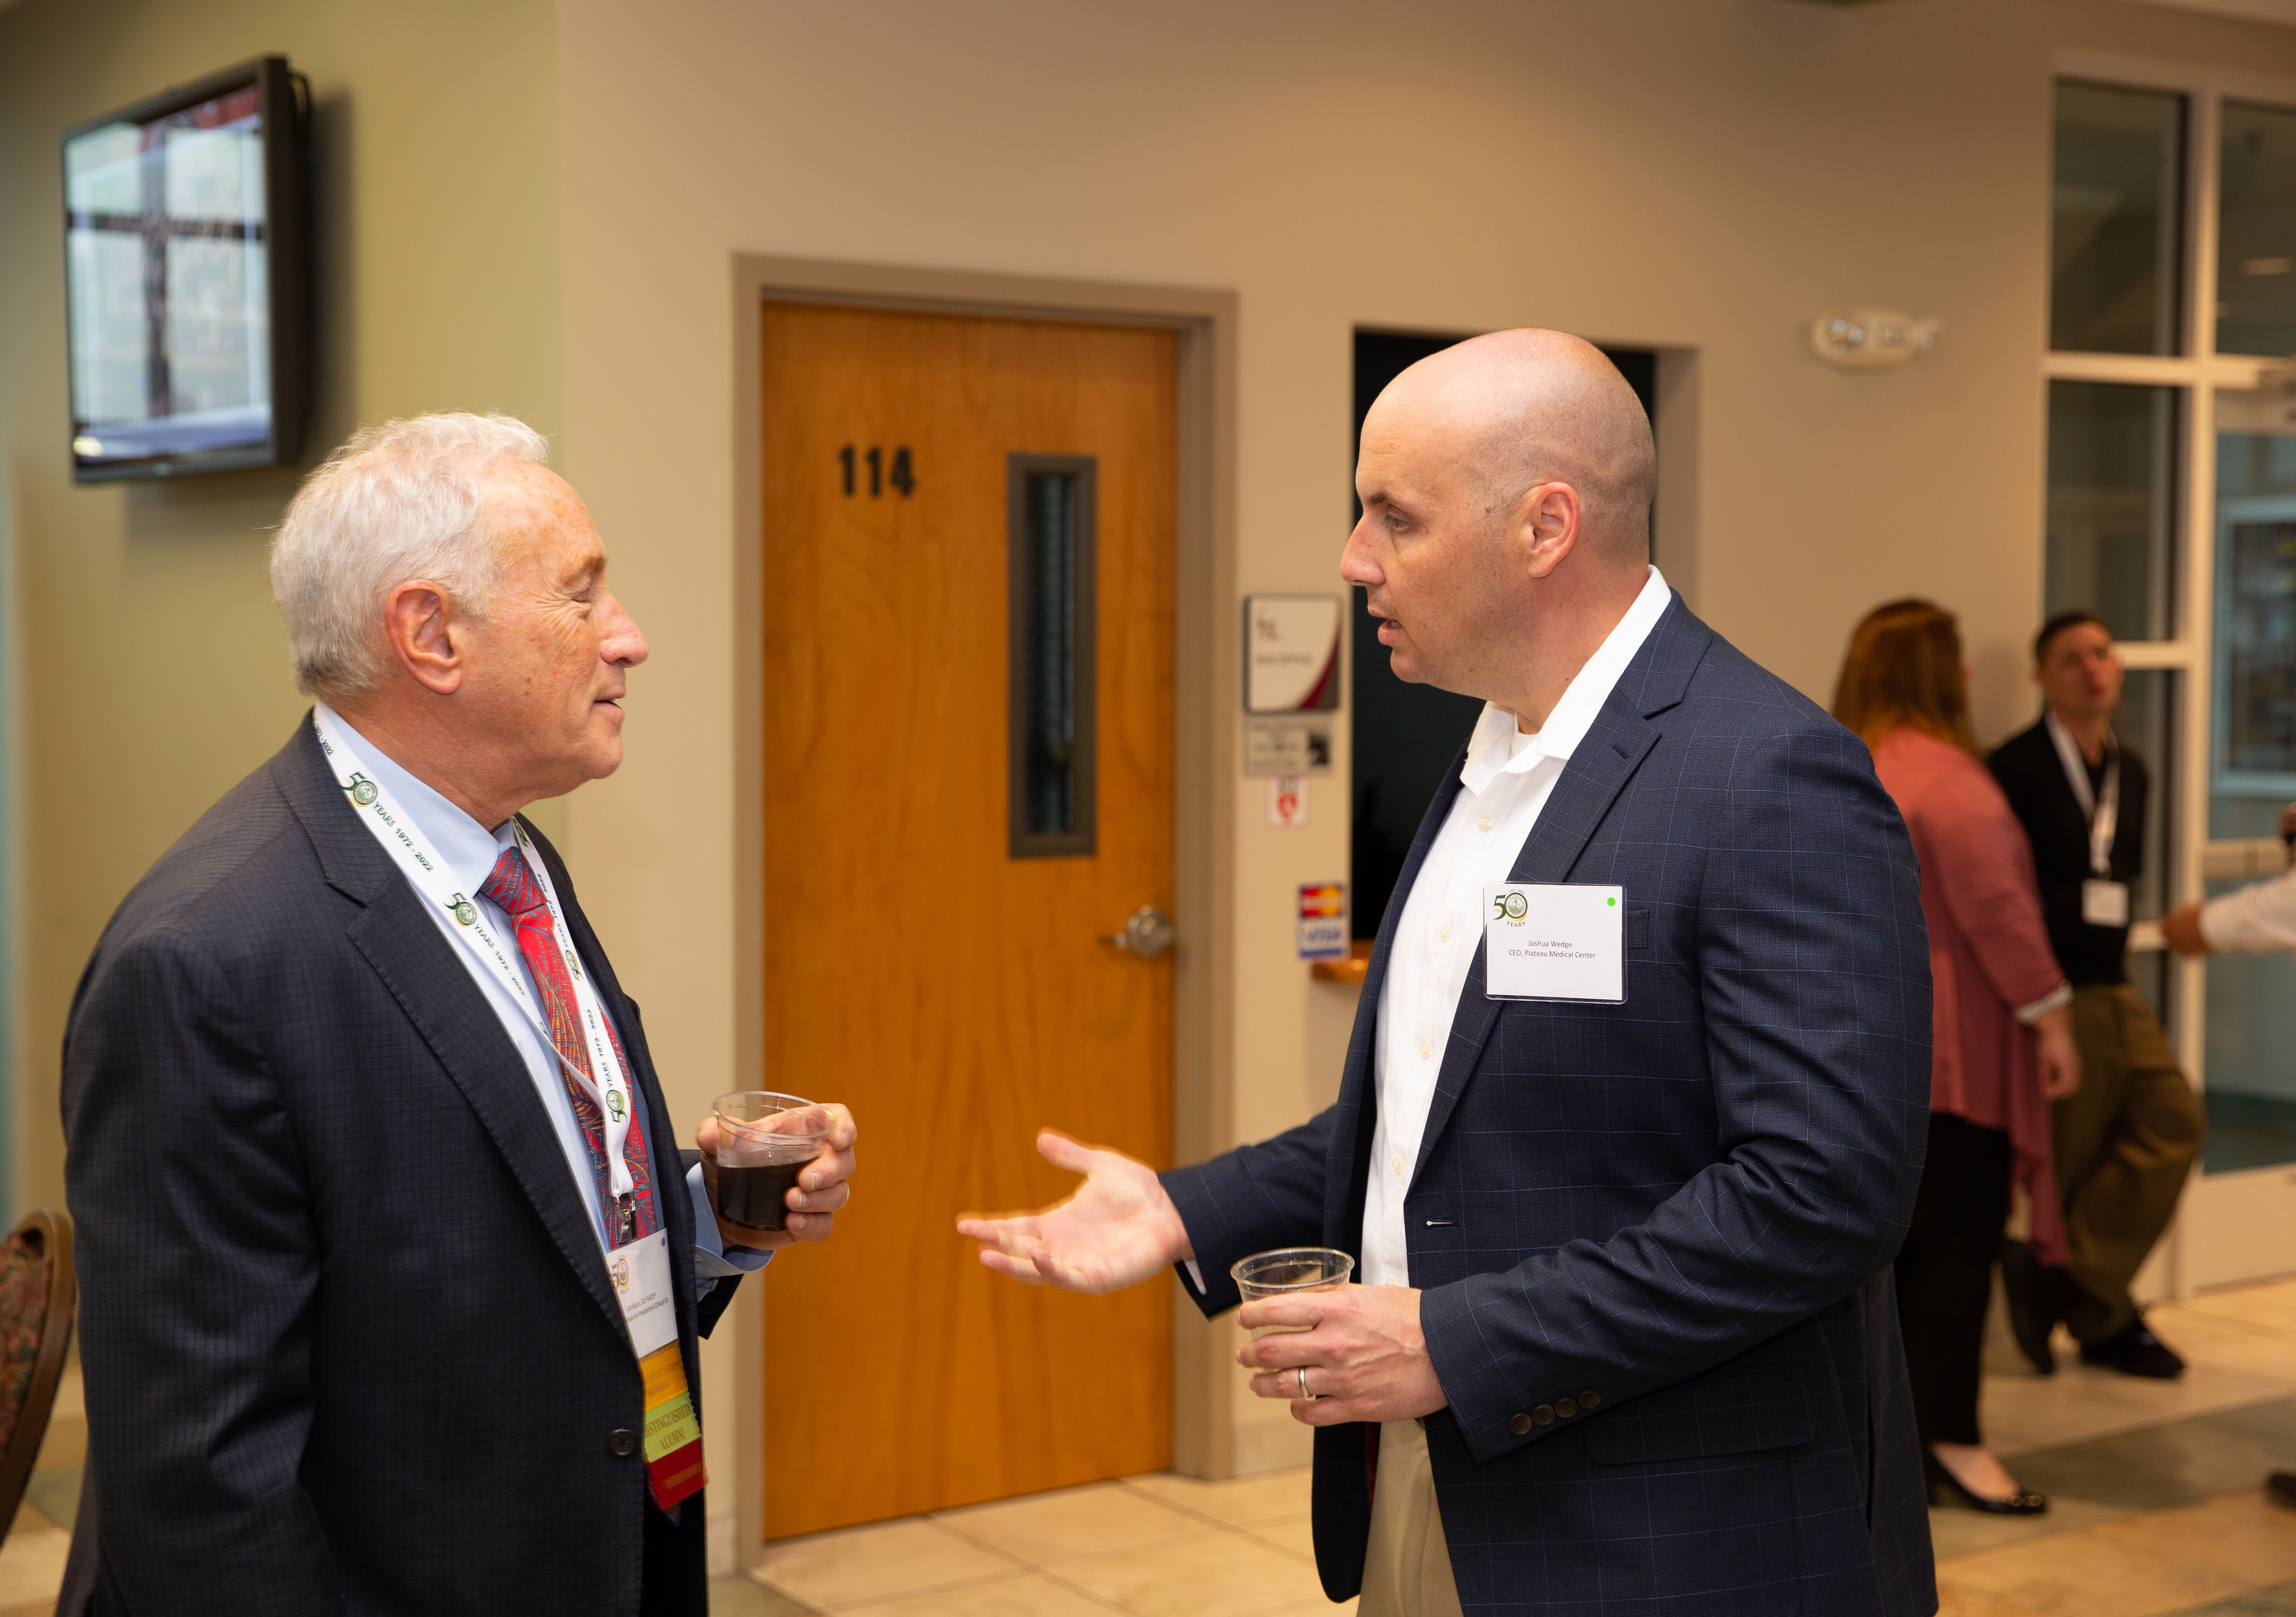 Dr. Rubin speaking with PMC CEO Joshua Wedge